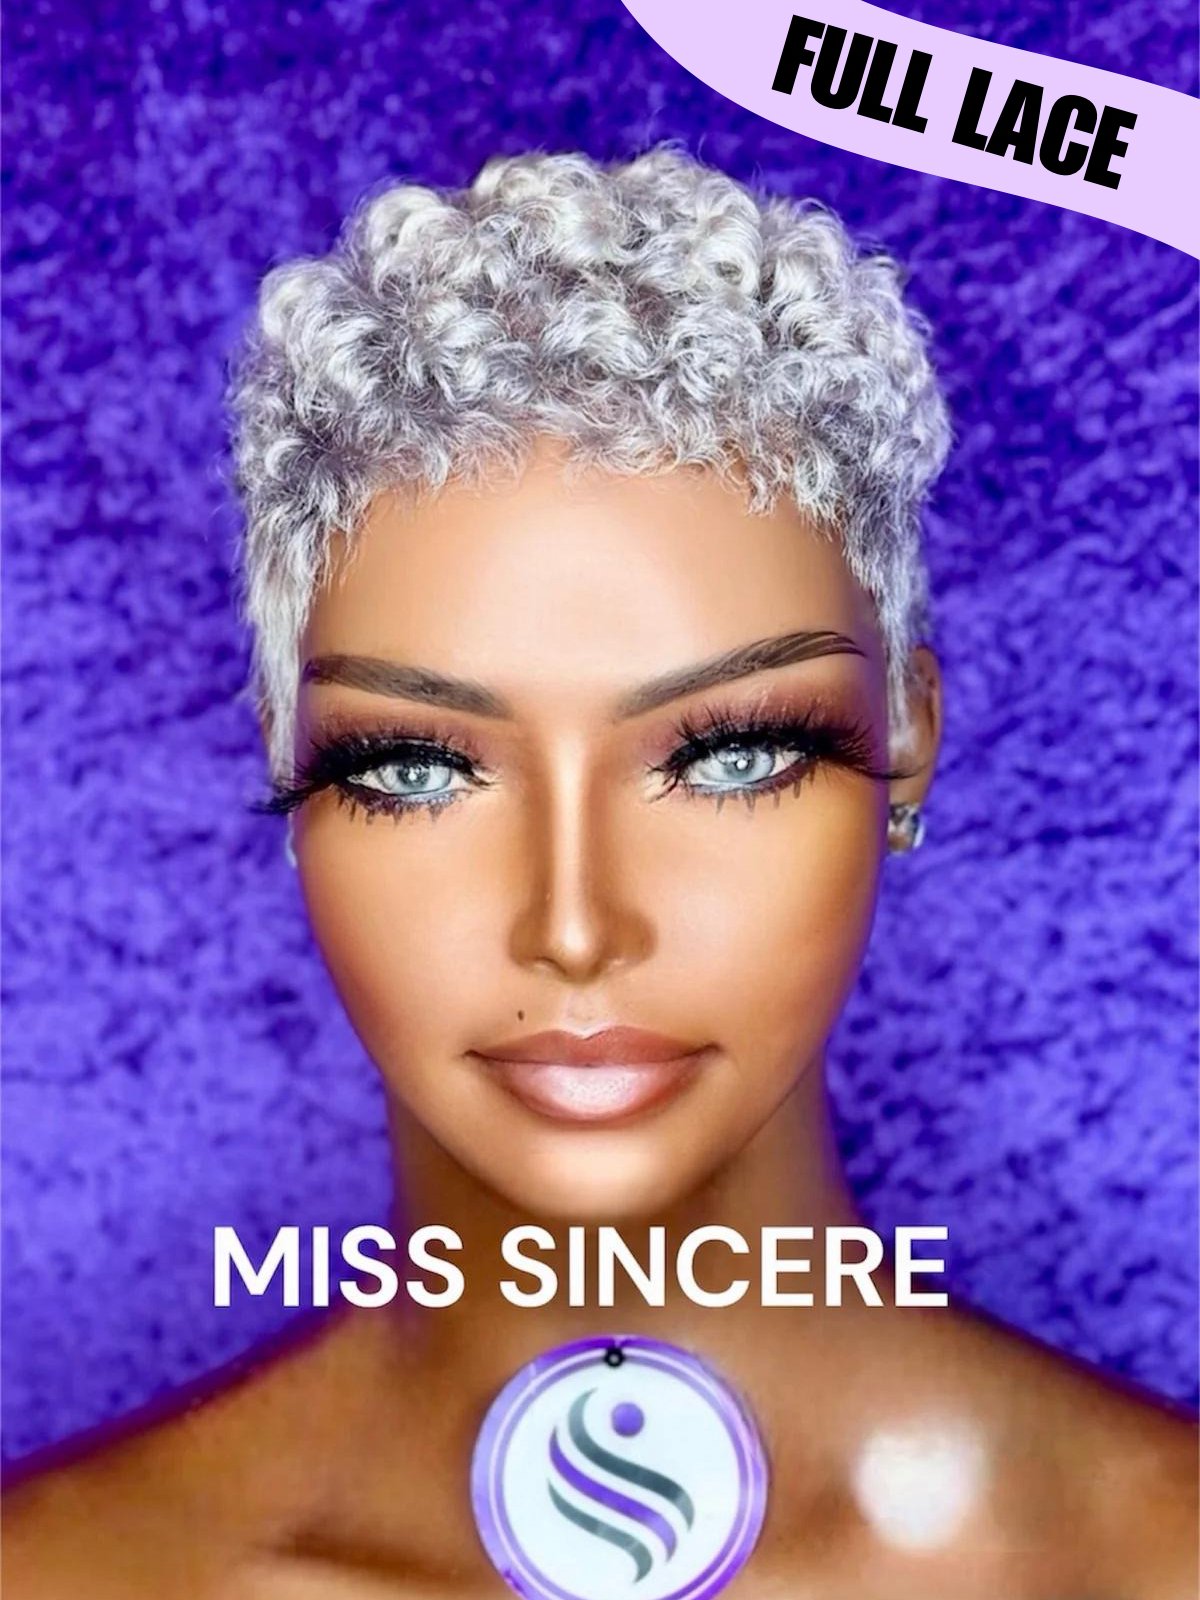 MISS SINCERE FULL LACE - Signature Specialty Salon